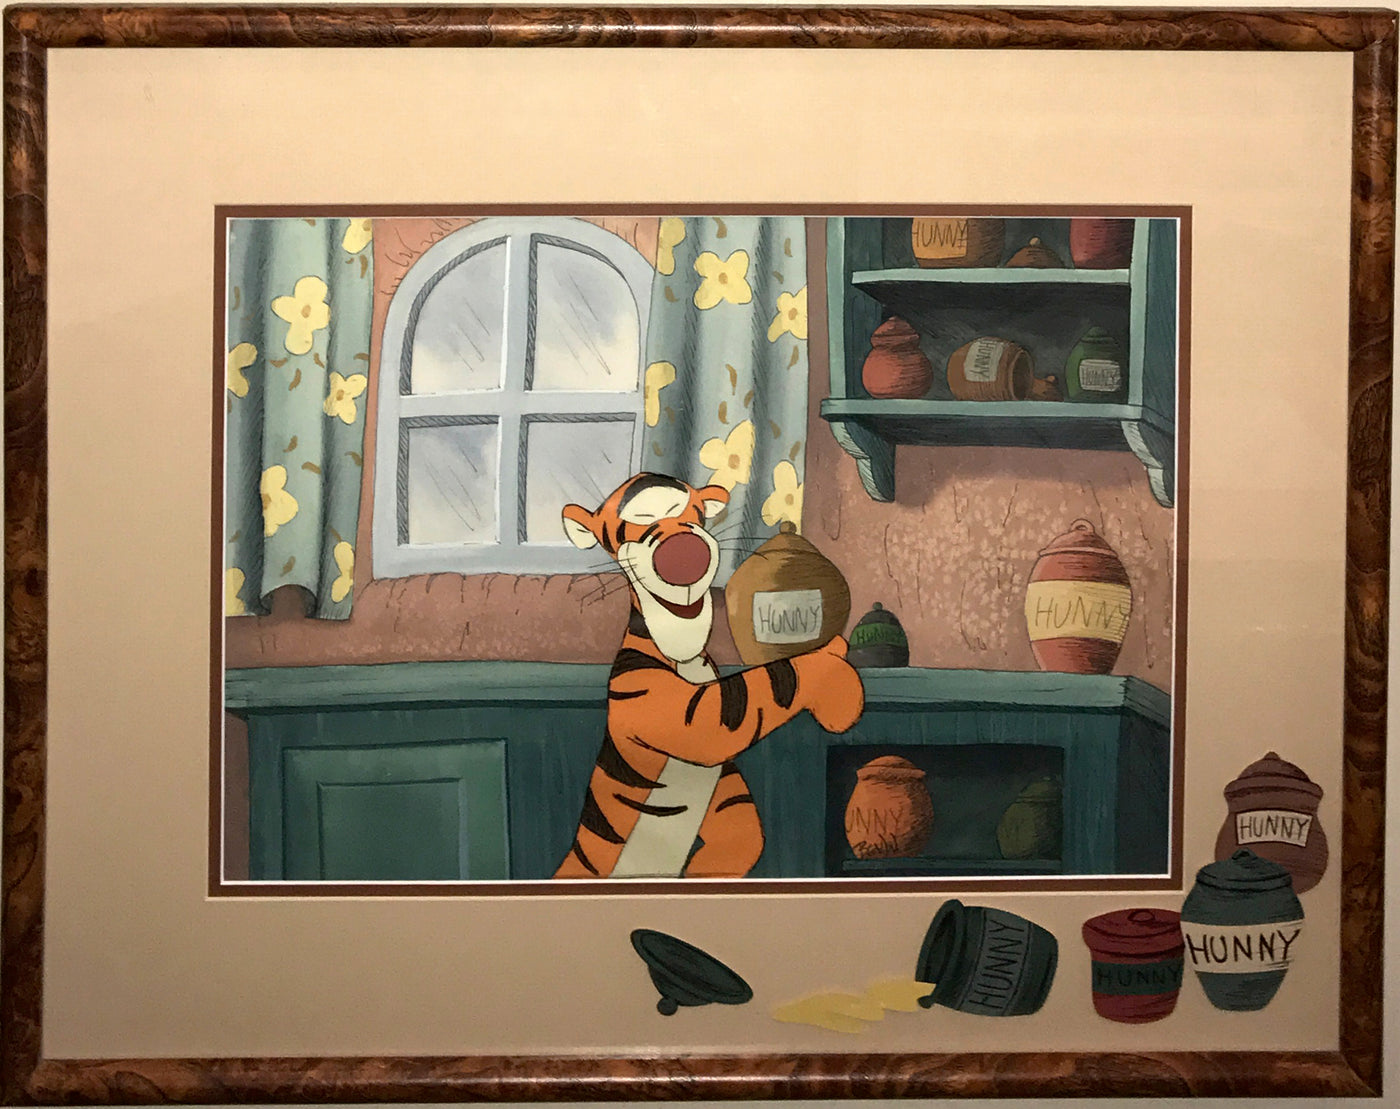 Original Walt Disney Production Cel from Winnie the Pooh and the Blustery Day (1968) featuring Tigger